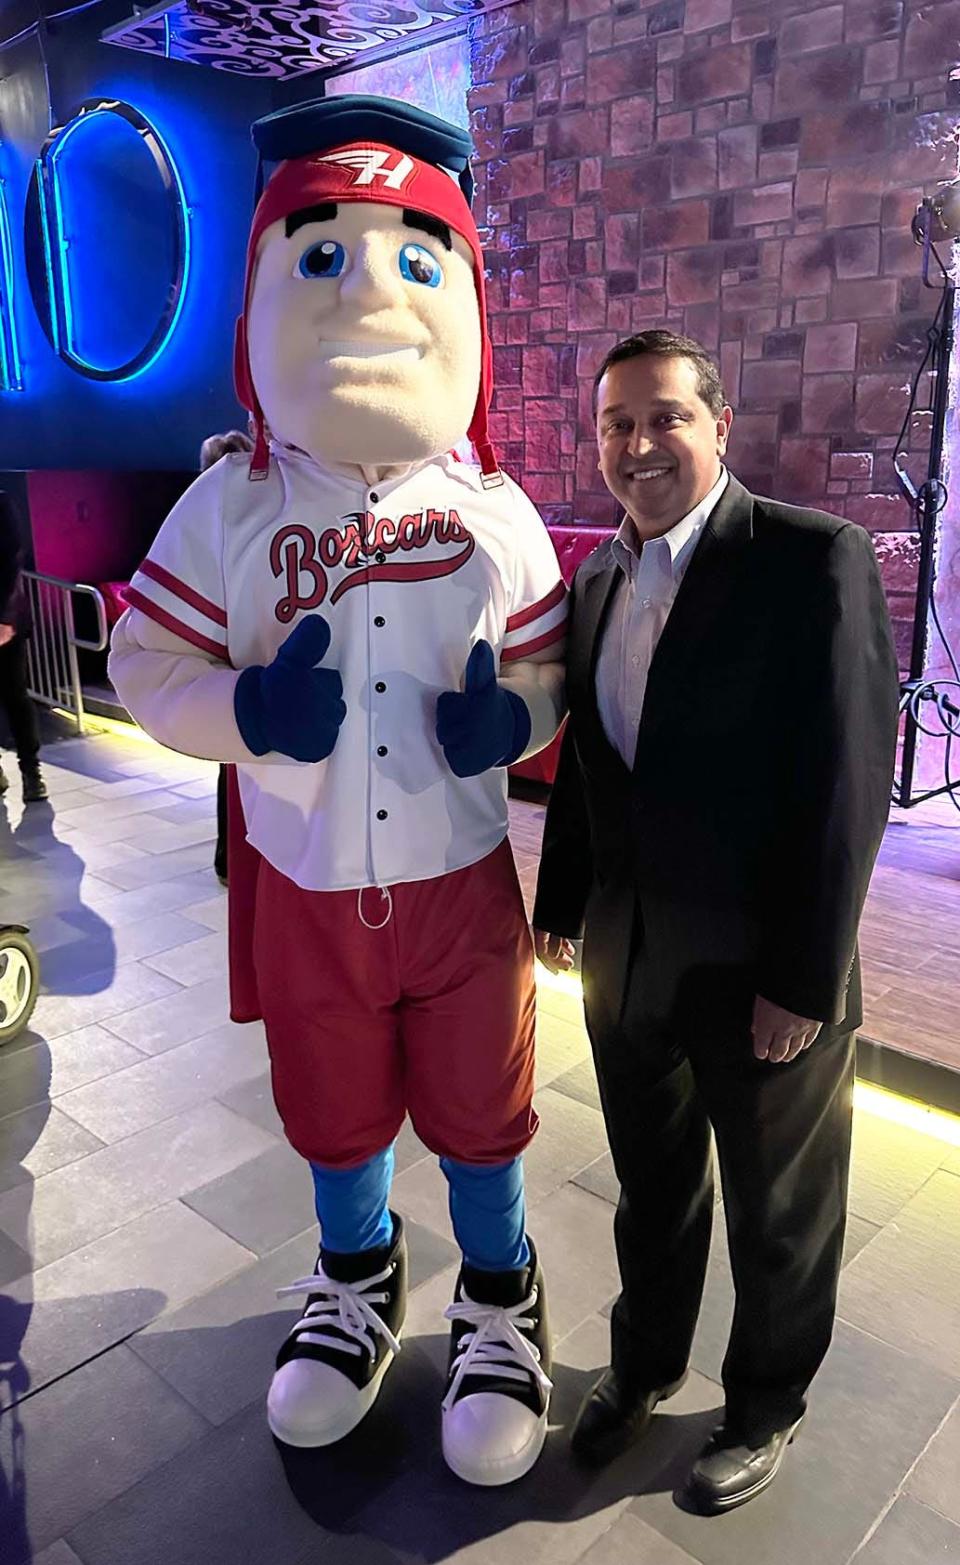 Stryker, the Hagerstown Flying Boxcars' mascot, poses for a photo with Meritus Health President and CEO Maulik Joshi during a press conference and private event at Seven Ten in Hagerstown on Feb. 13, 2024.